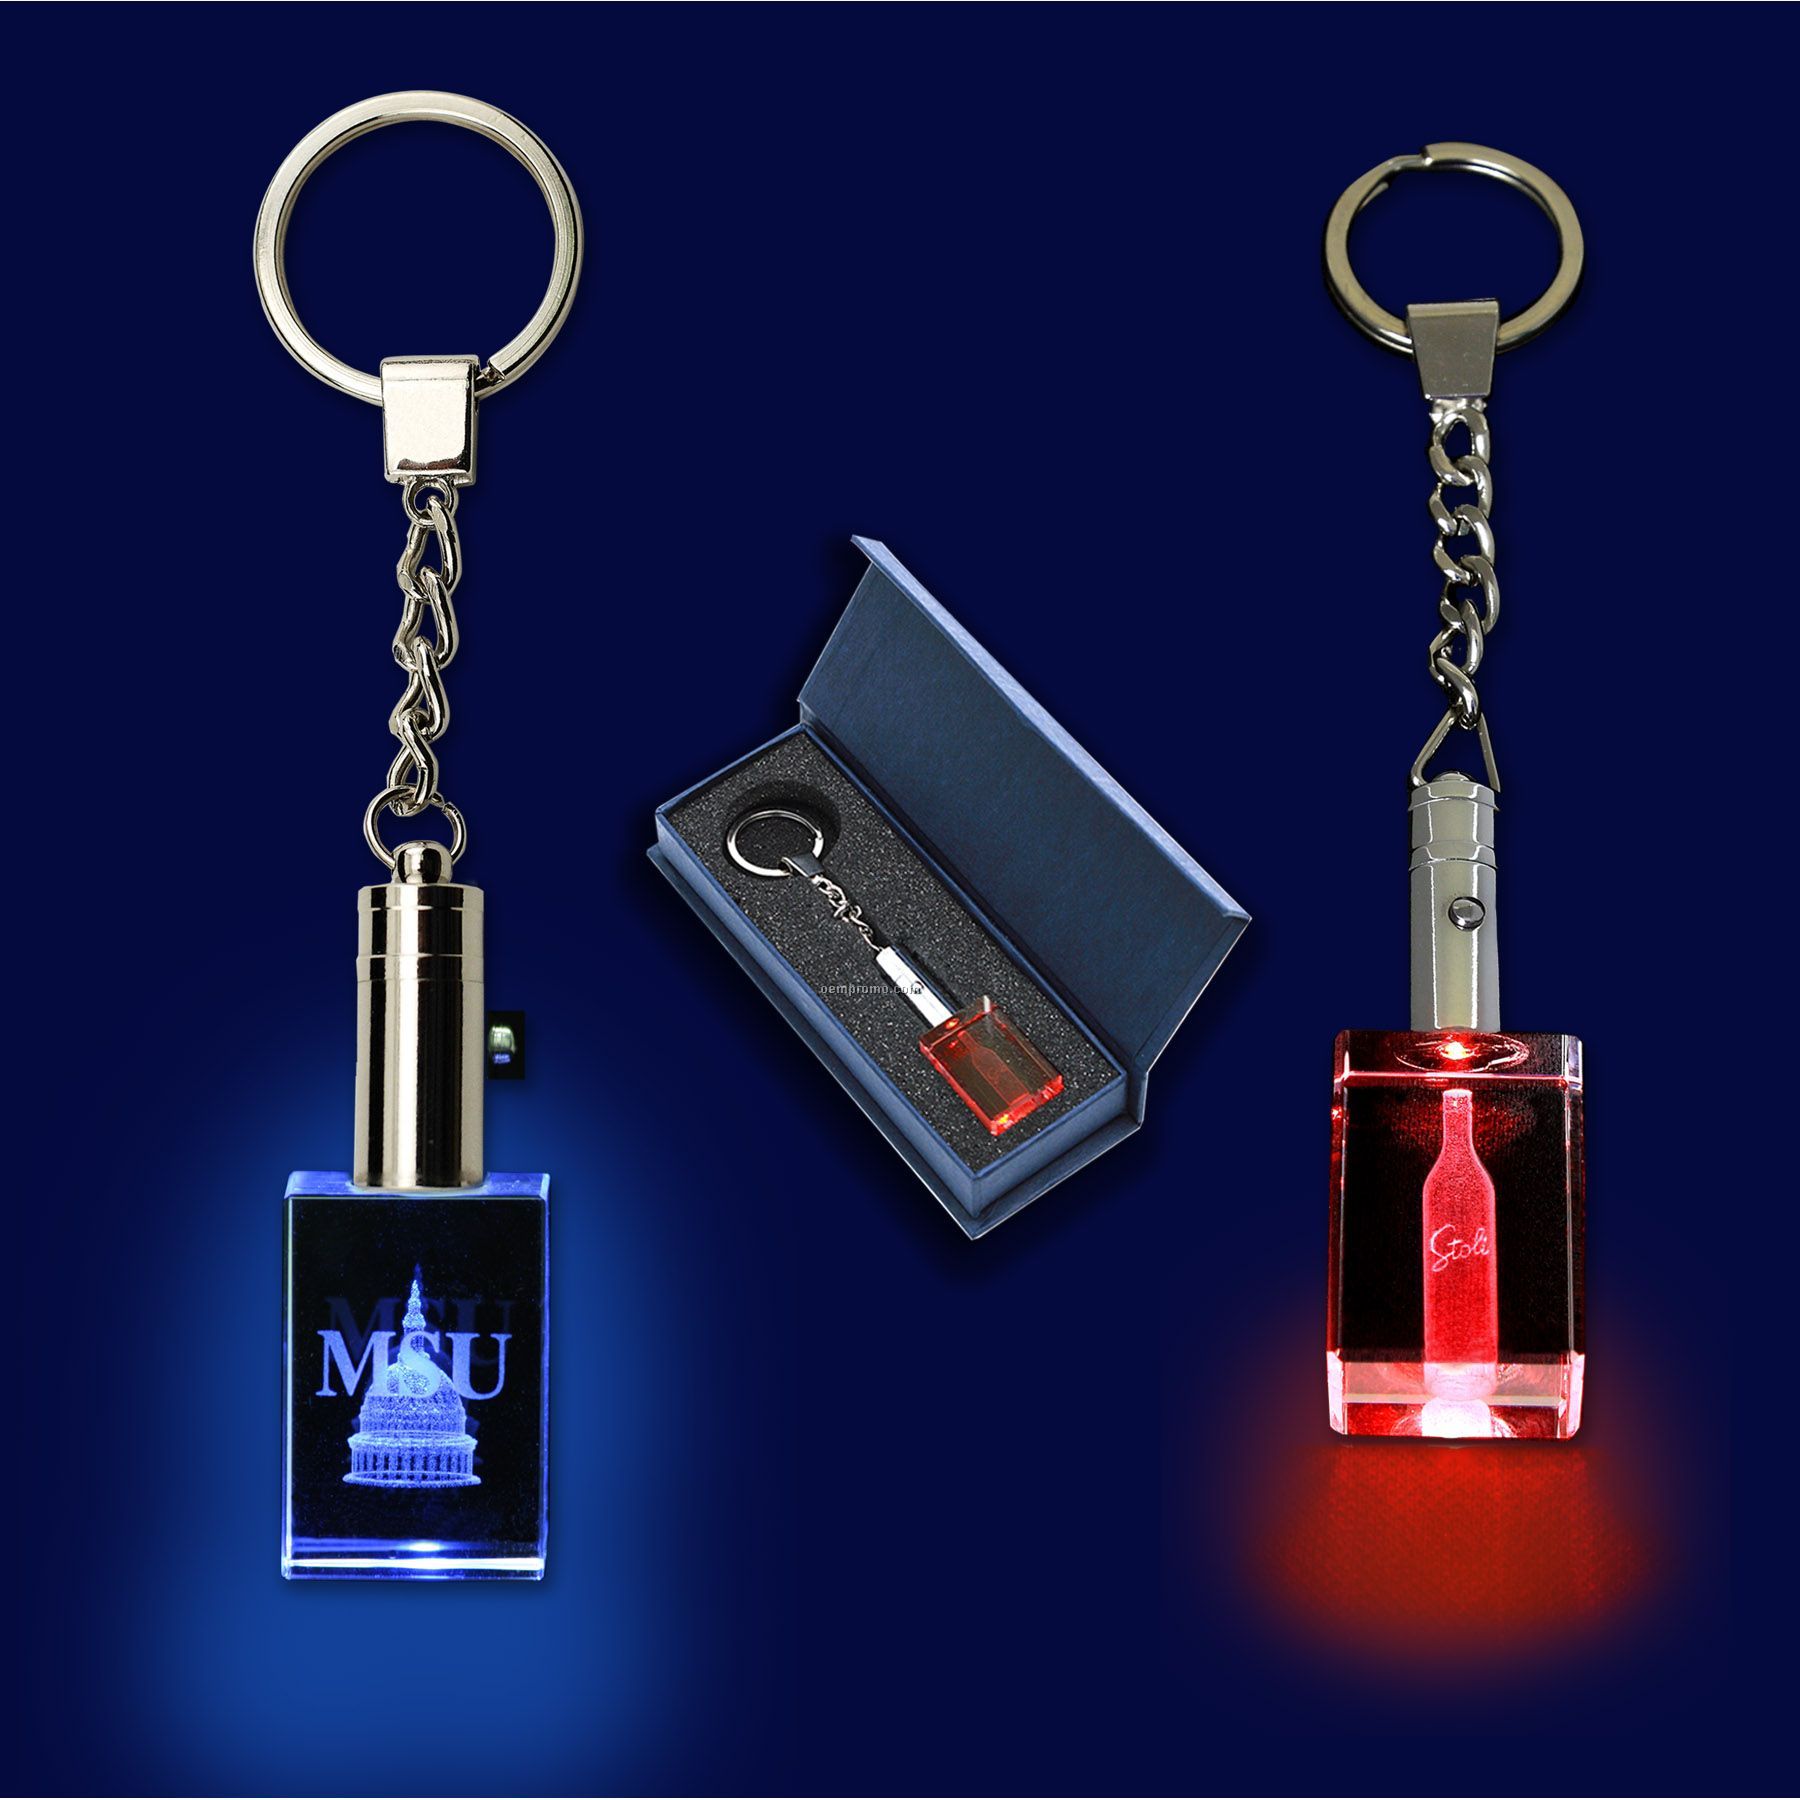 Crystal Keytag With Lasered Imprint And LED